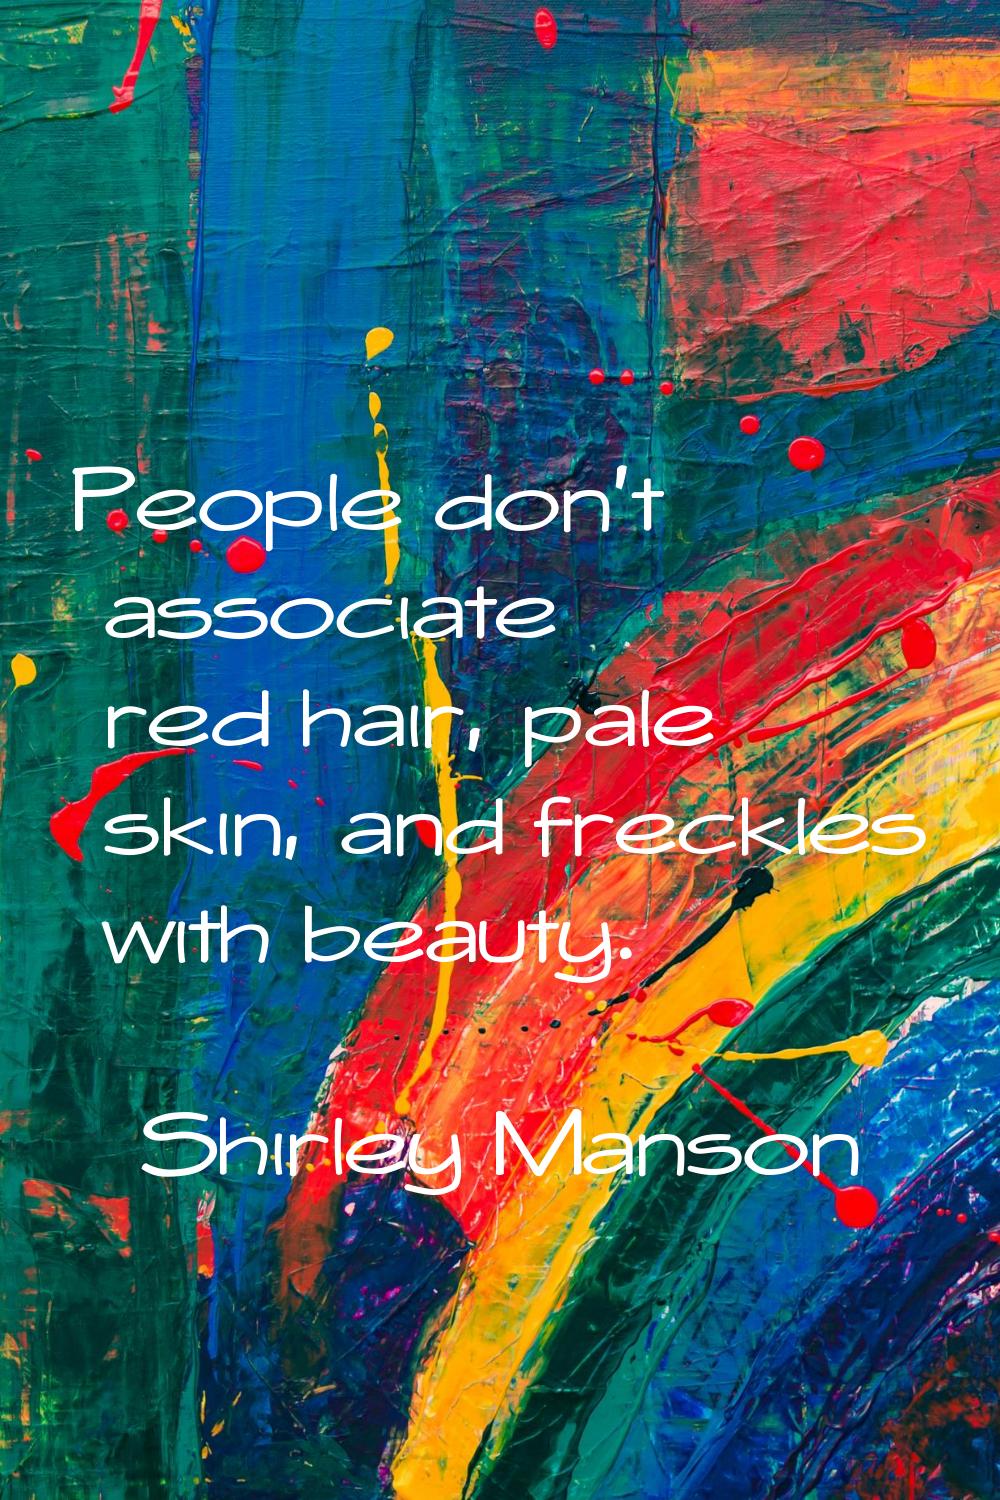 People don't associate red hair, pale skin, and freckles with beauty.